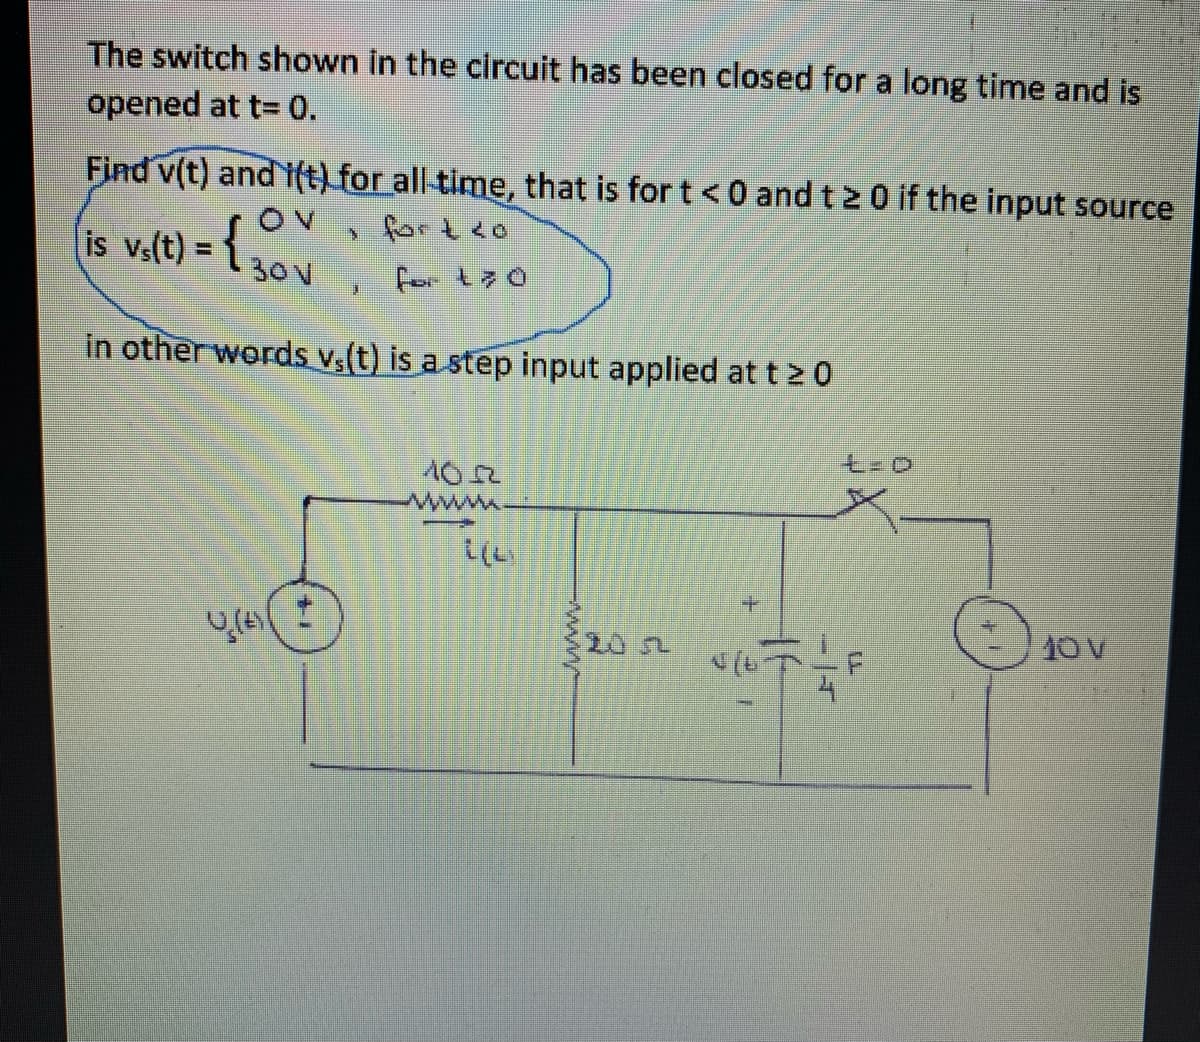 The switch shown in the circuit has been closed for a long time and is
opened at t= 0.
Find v(t) and 1(t) for all-time, that is for t <0 and t 2 0 if the input source
OV
is vs(t) = 1 30v
> forteo
for t7 0
in other words v,(t) is a step input applied at t2 0
ww
+.
20 గ
10 V
